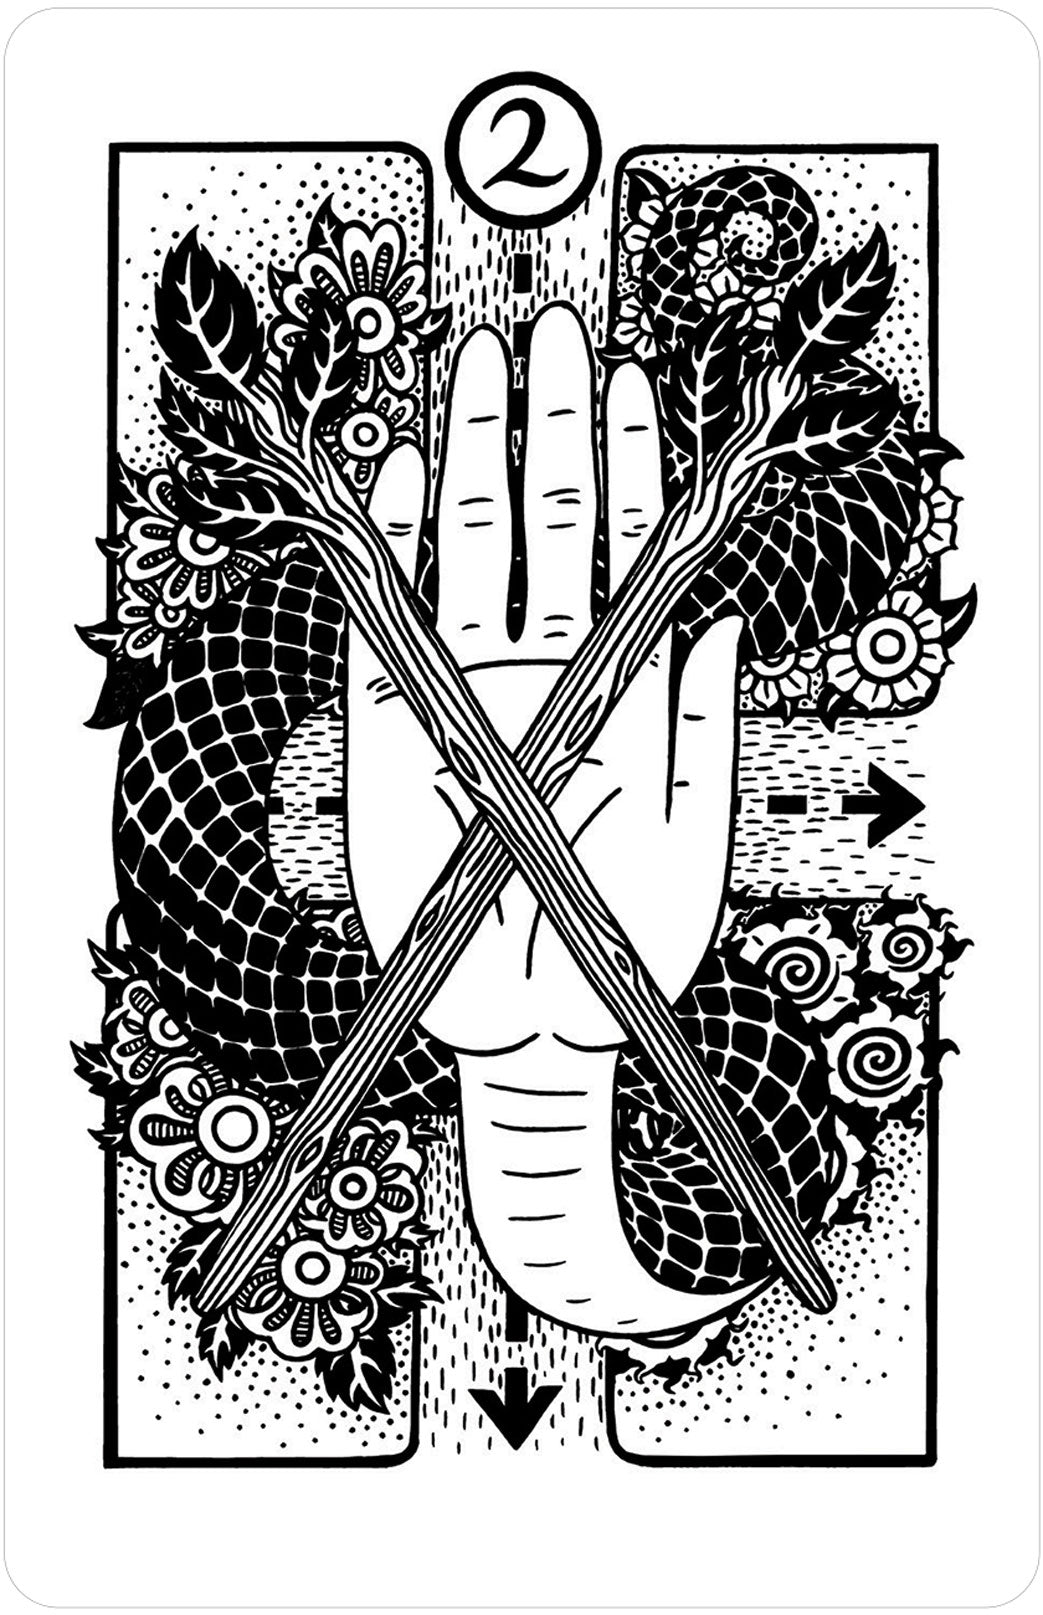 2 of wands card